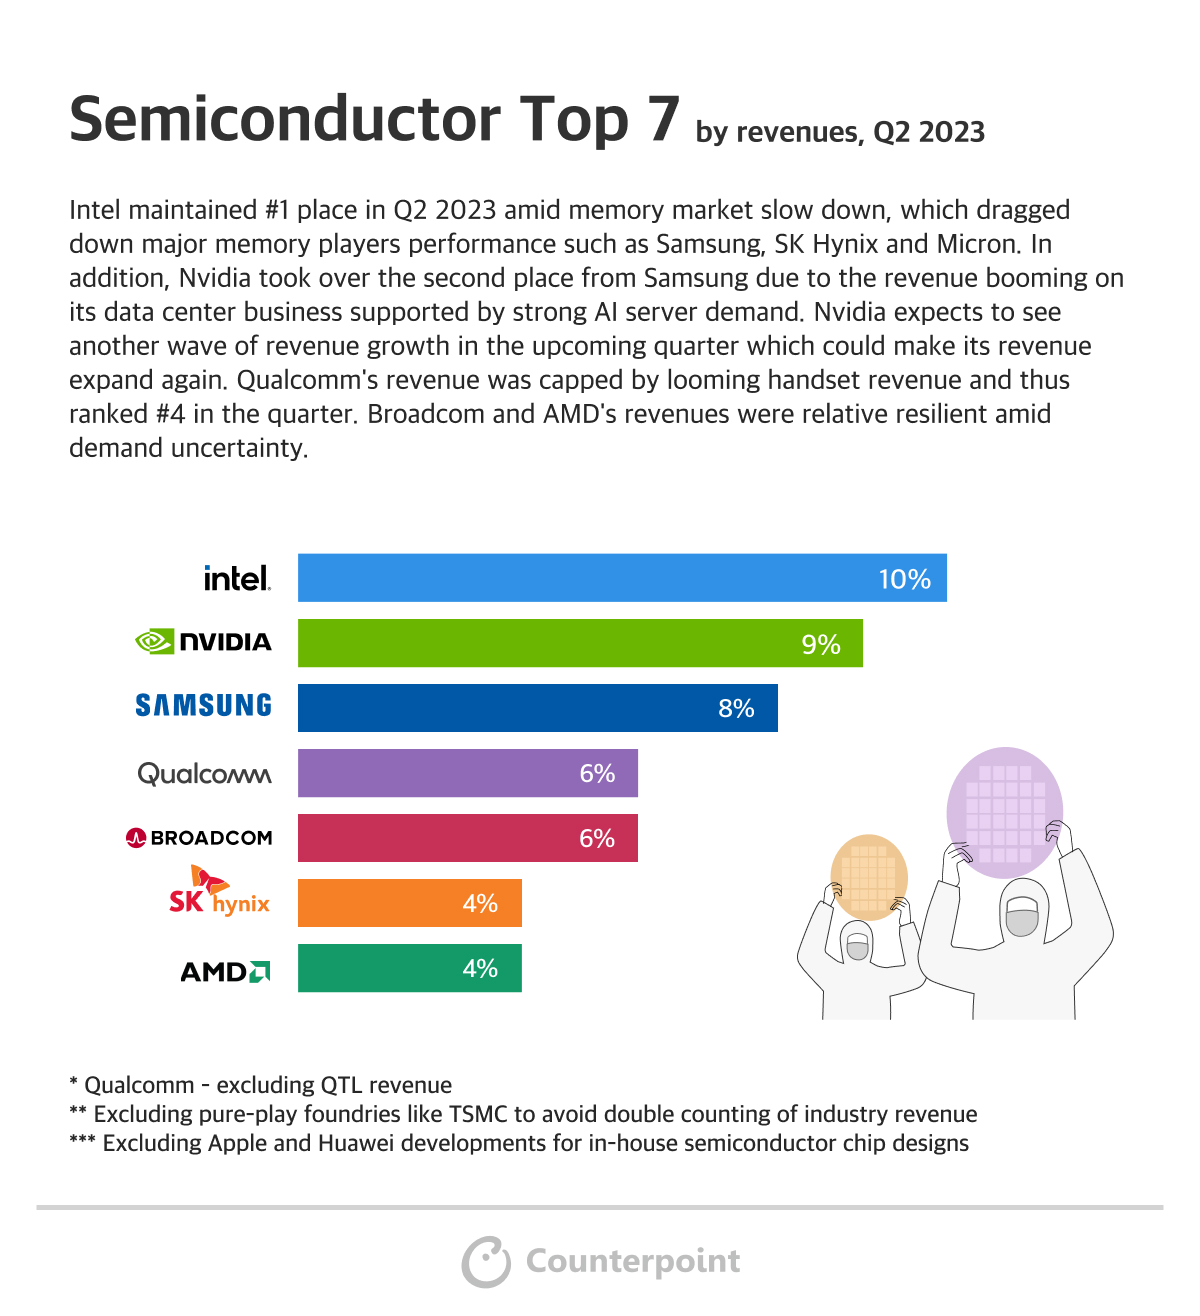 Counterpoint Semiconductor Top 7 Q2 2023